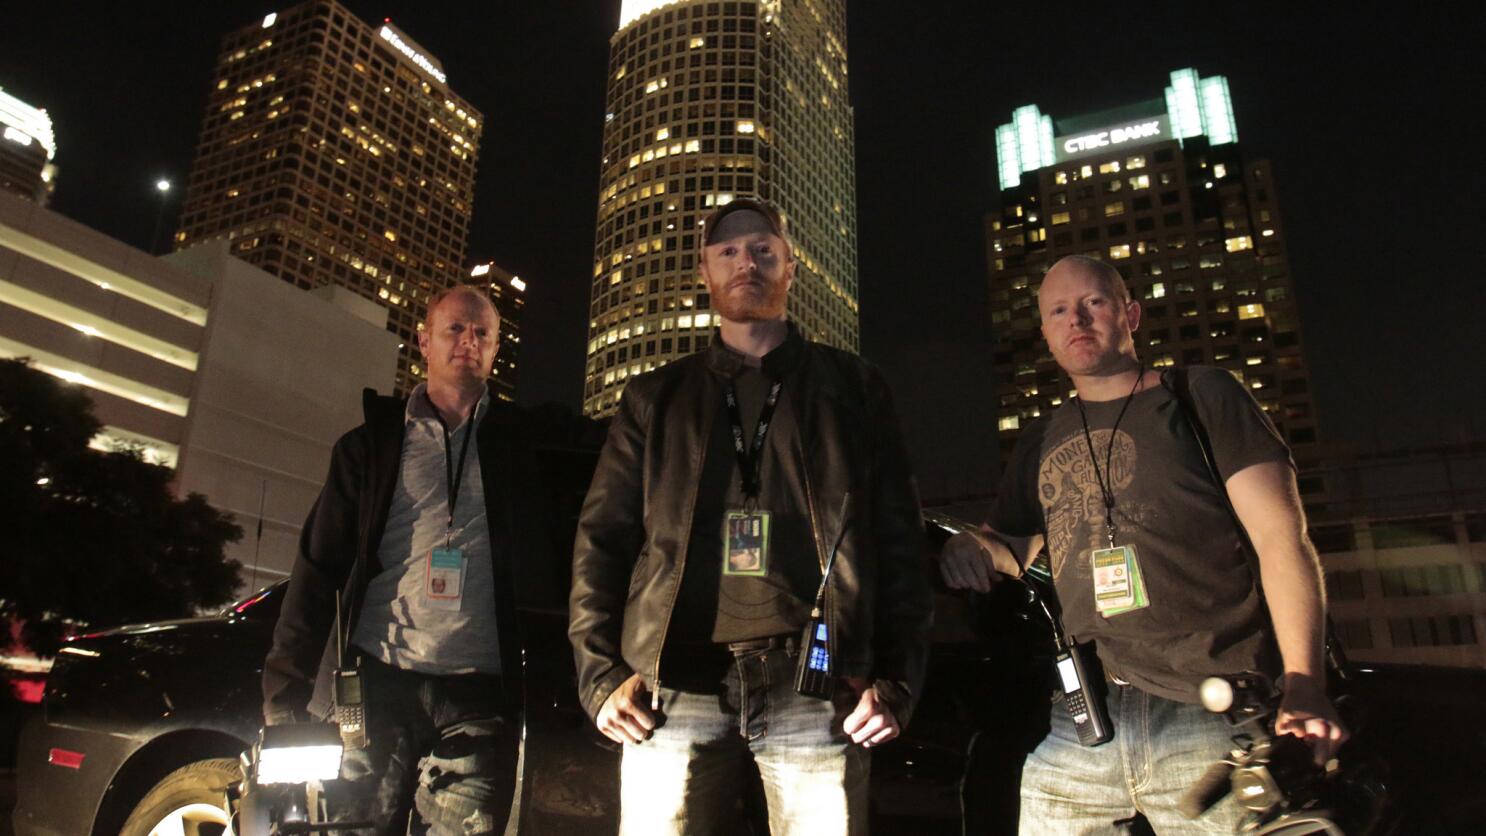 Movie fiction mirrors fact for L.A.'s real-life 'nightcrawlers